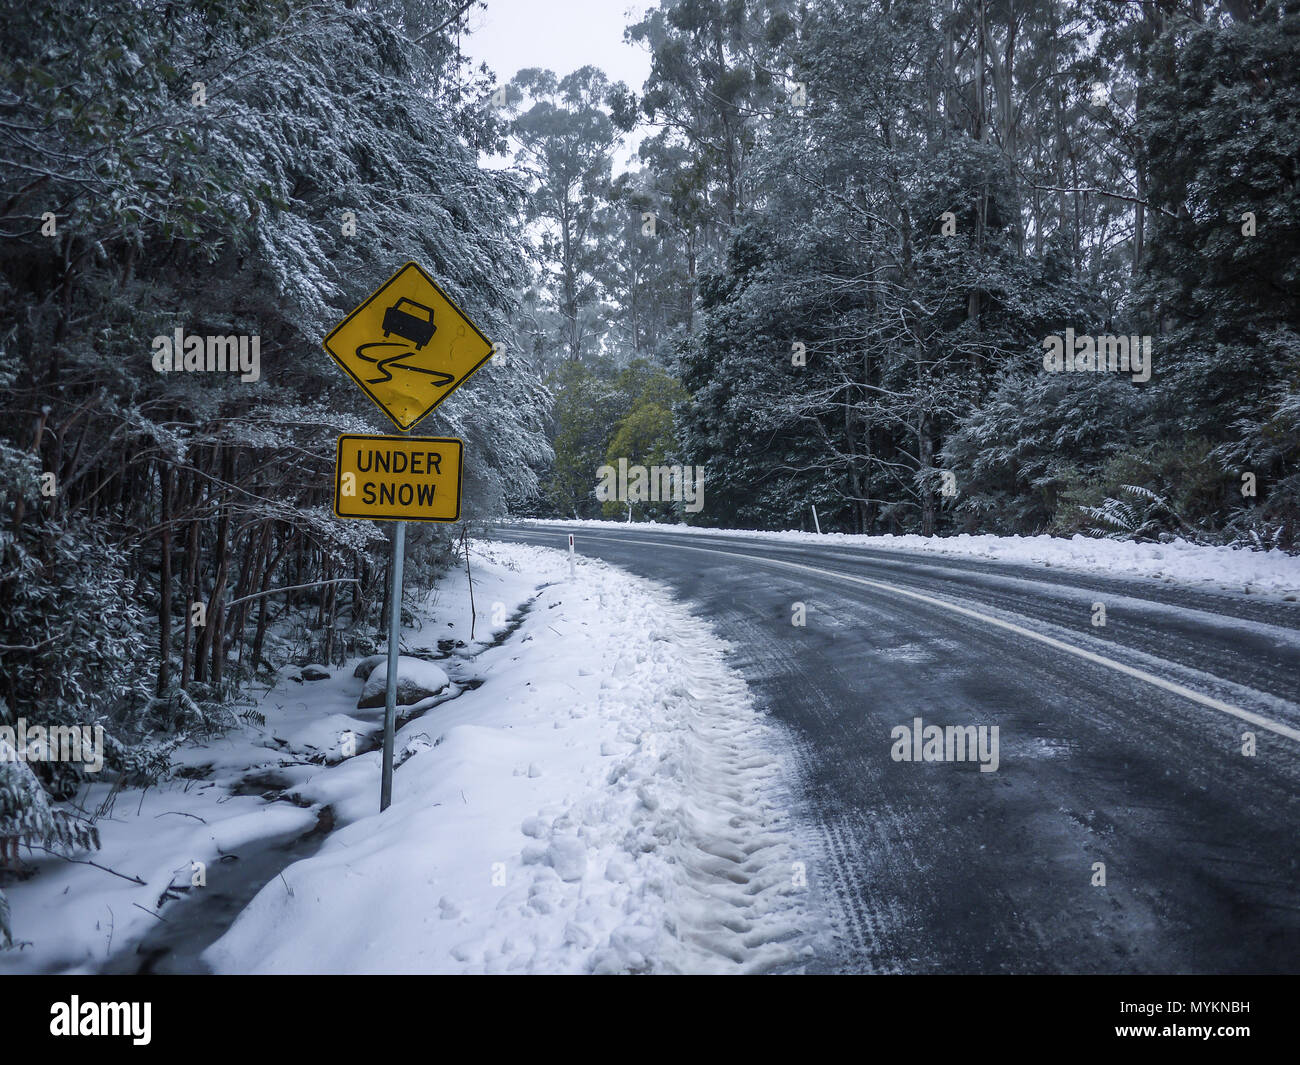 Slippery road warning sign for car drivers on side of a snow covered road. Icy scenic mountain route in winter forest. Mt Donna Buang, VIC Australia Stock Photo